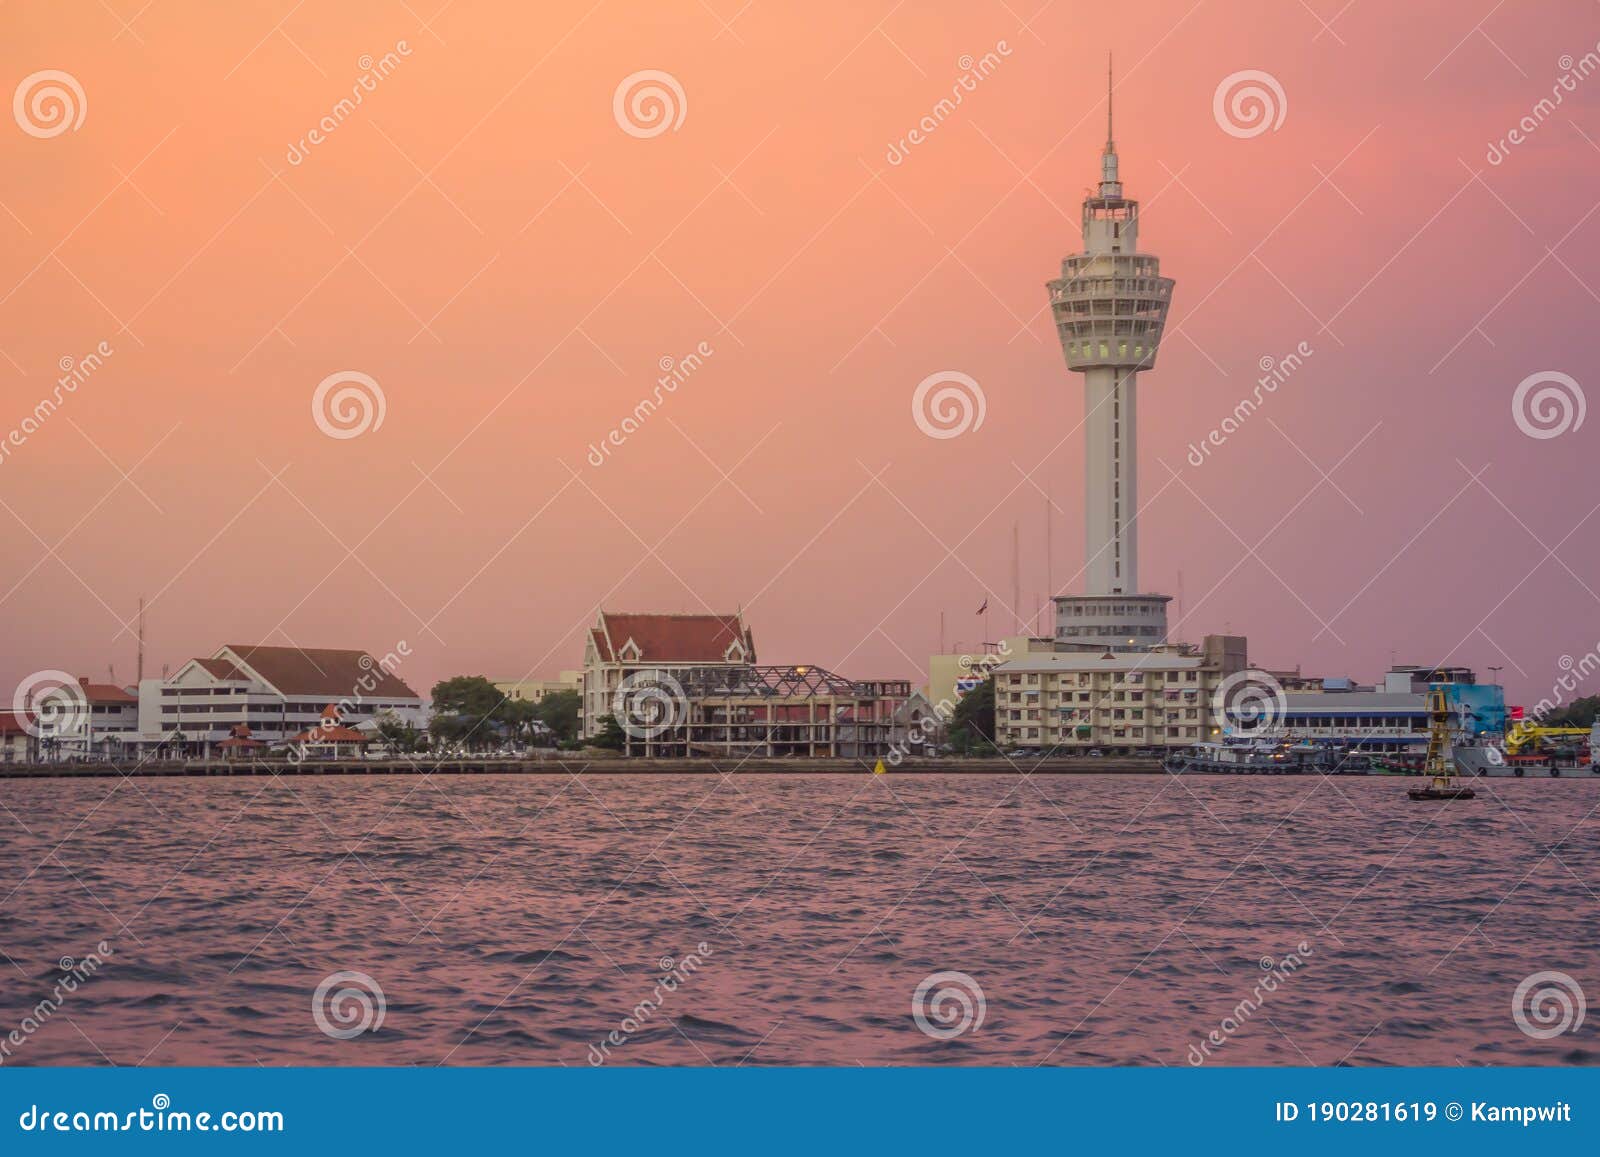 Riverfront View Of Samut Prakan City Hall With New Observation Tower And Boat Pier Samut Prakan Is At The Mouth Of The Chao Stock Image Image Of Attraction Asean